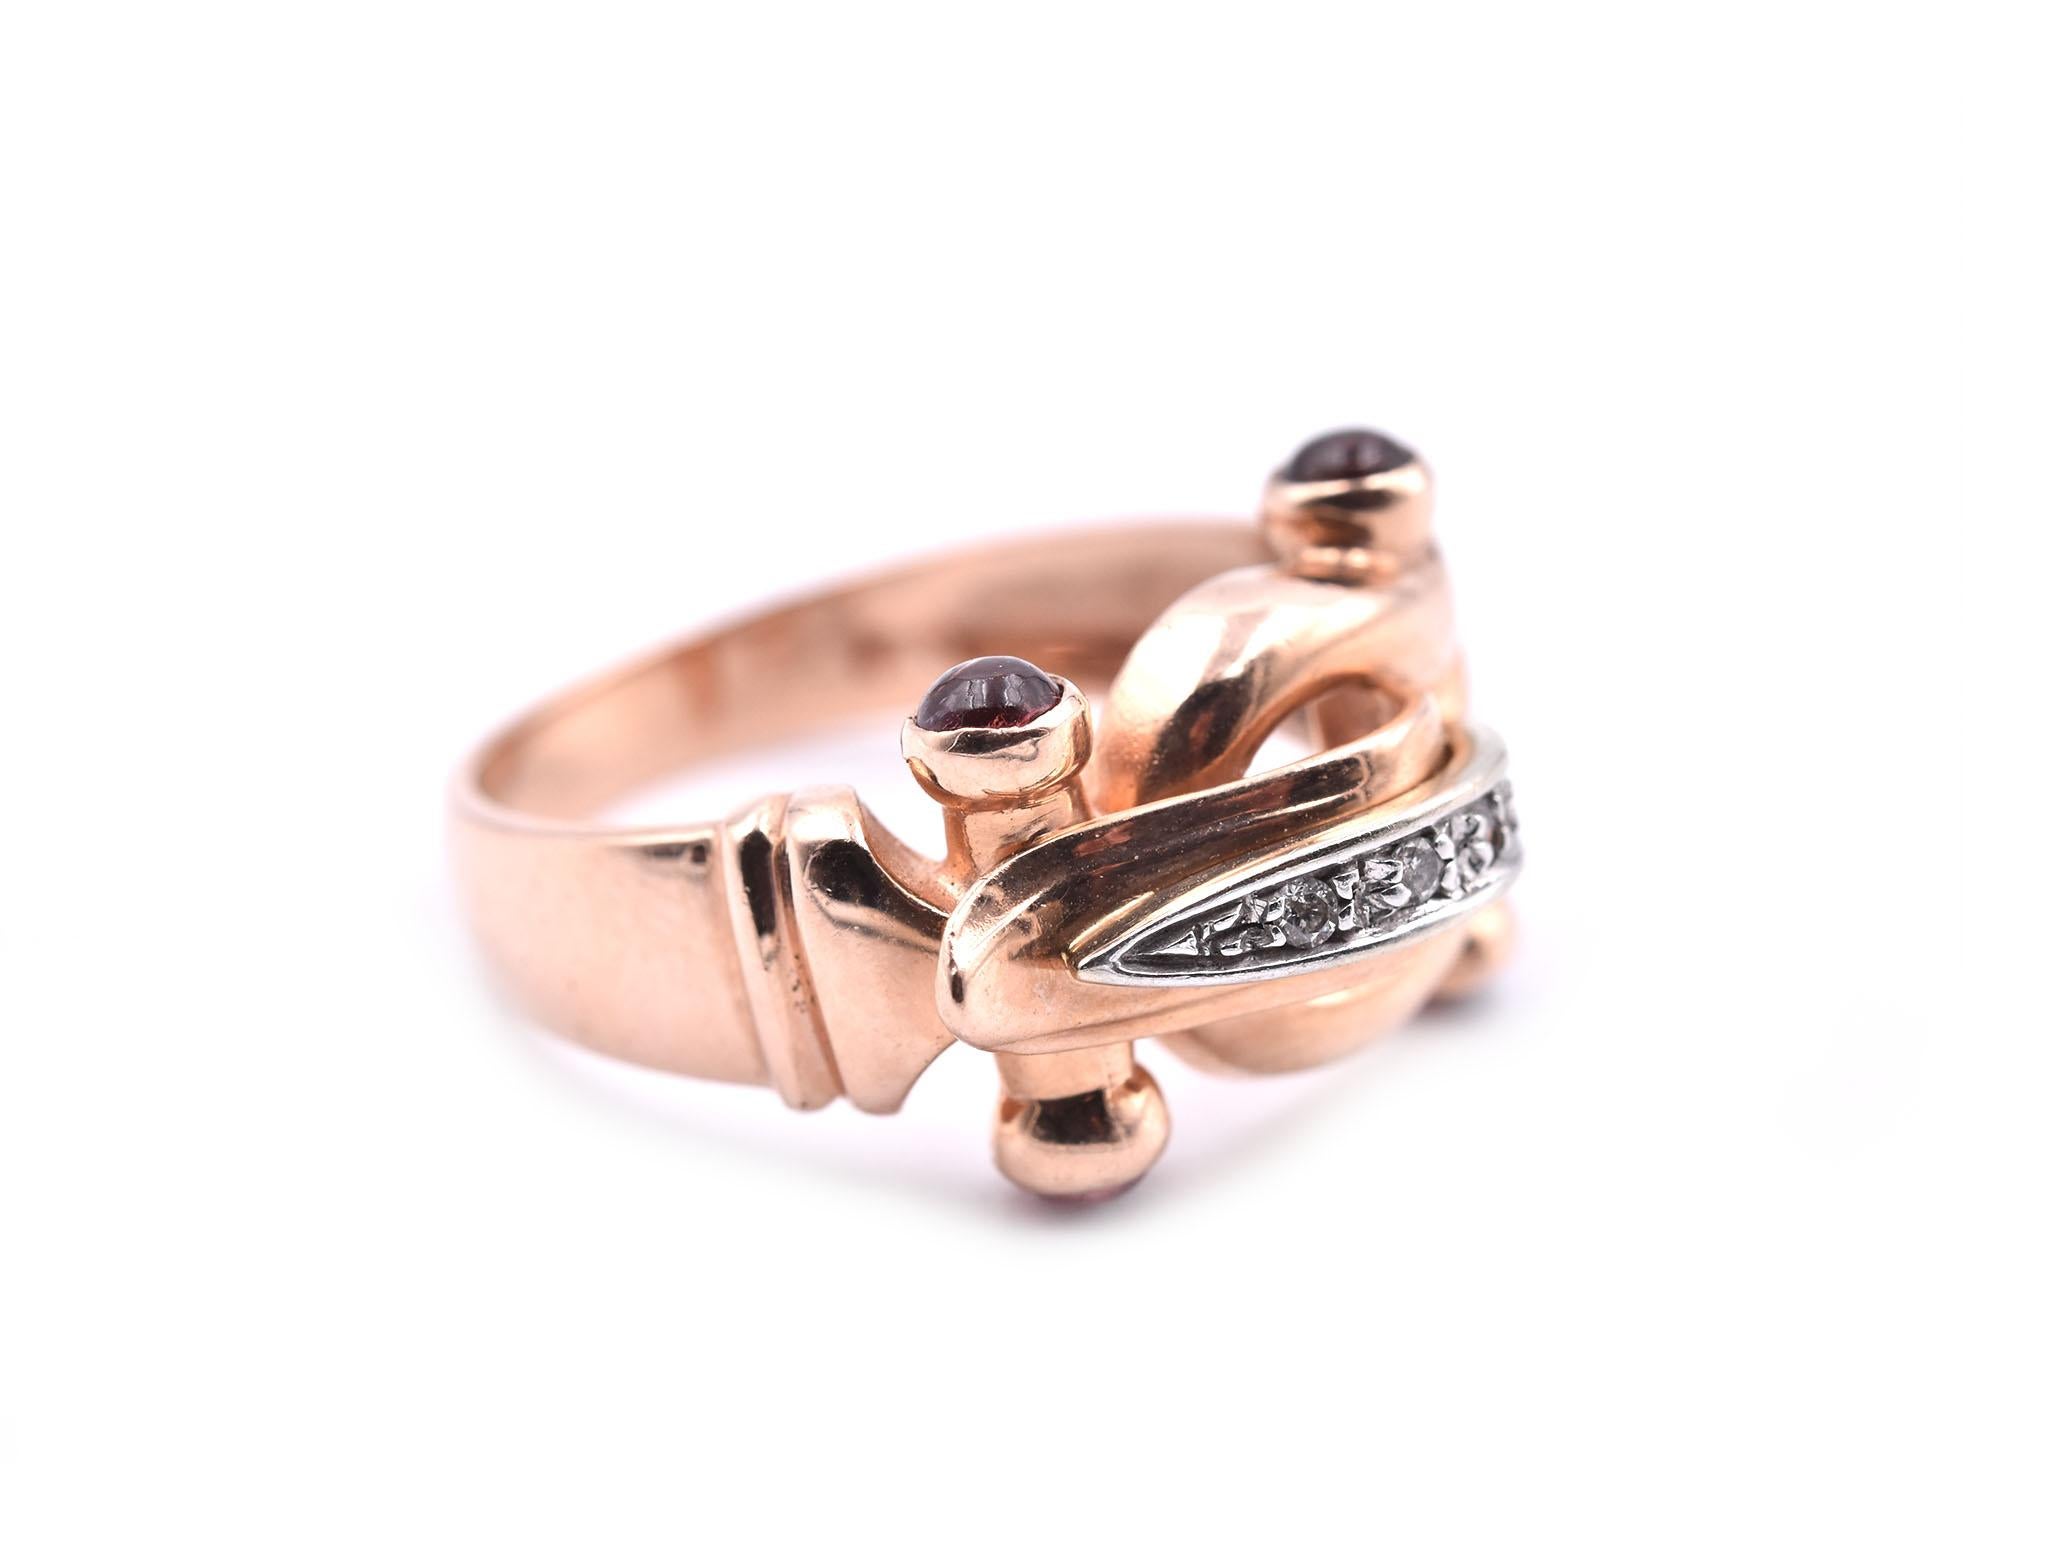 Designer: custom design
Material: 14k rose gold
Diamonds: round brilliant cut = .06cttw
Color: G
Clarity: SI1
Ring size: 7 ¾ (please allow two additional shipping days for sizing requests)
Dimensions: ring top measures 12.80mm by 19.33mm 
Weight: